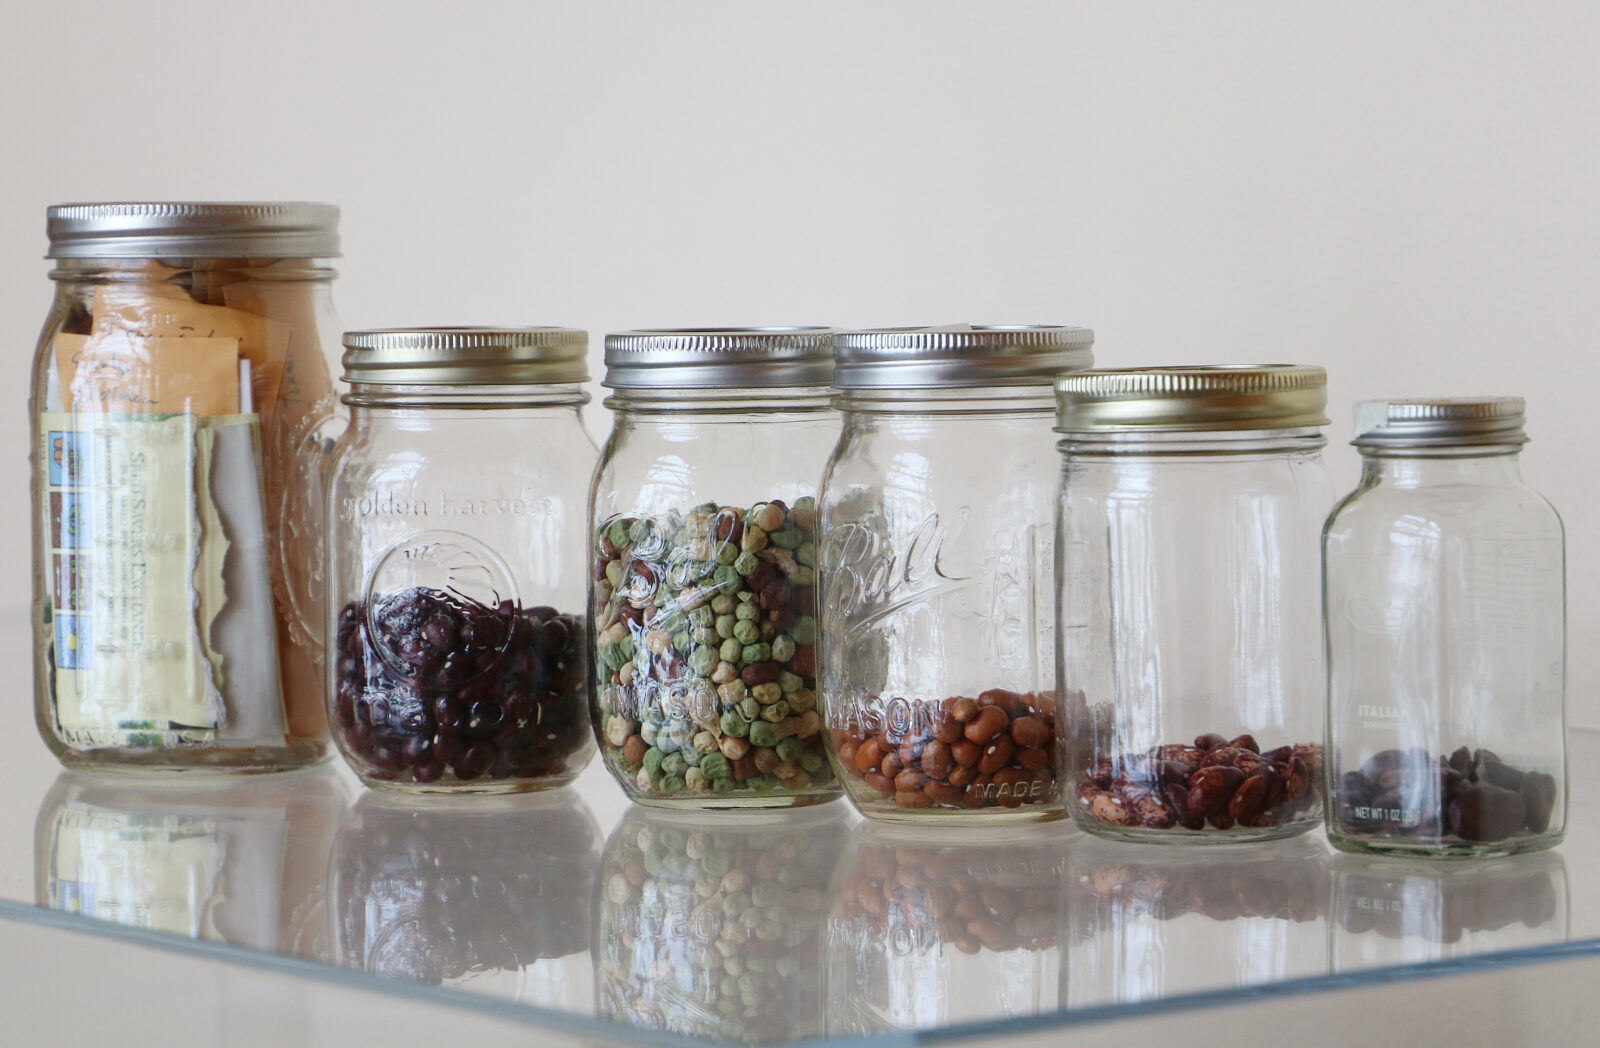 Several glass jars with a variety of different seeds sit in a row on a glass shelf